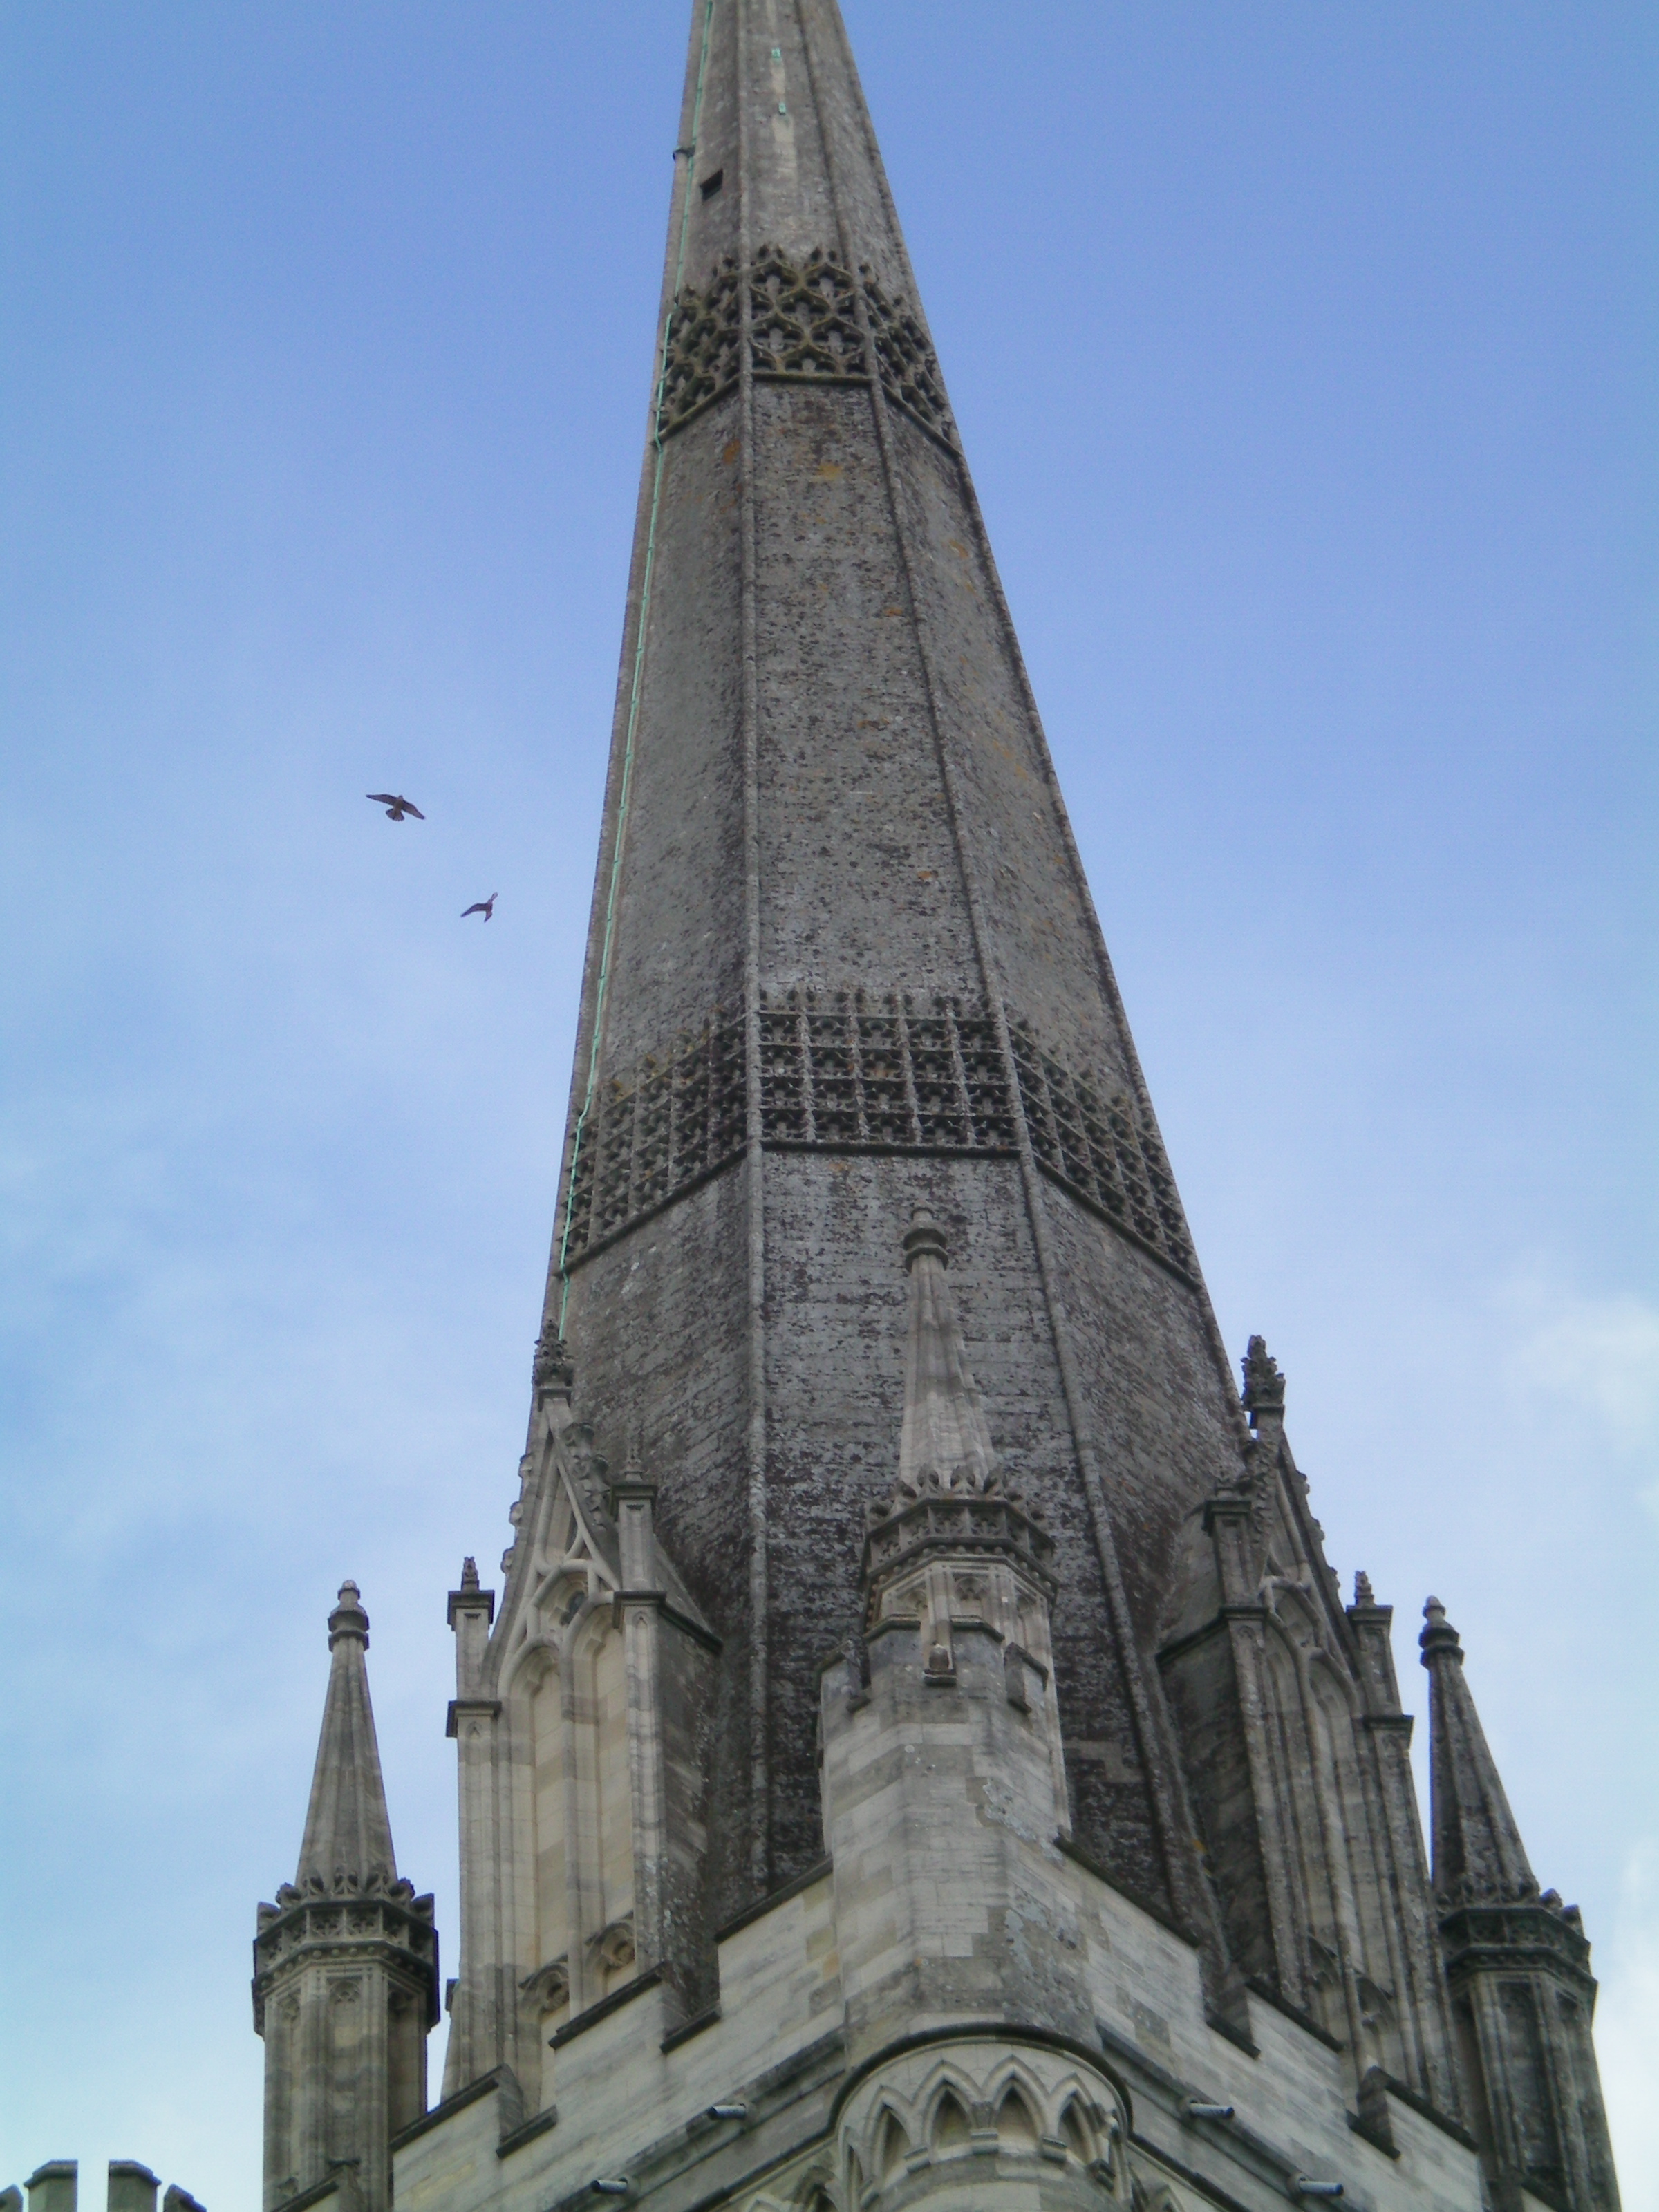 Peregrine falcons in flight over the cathedral